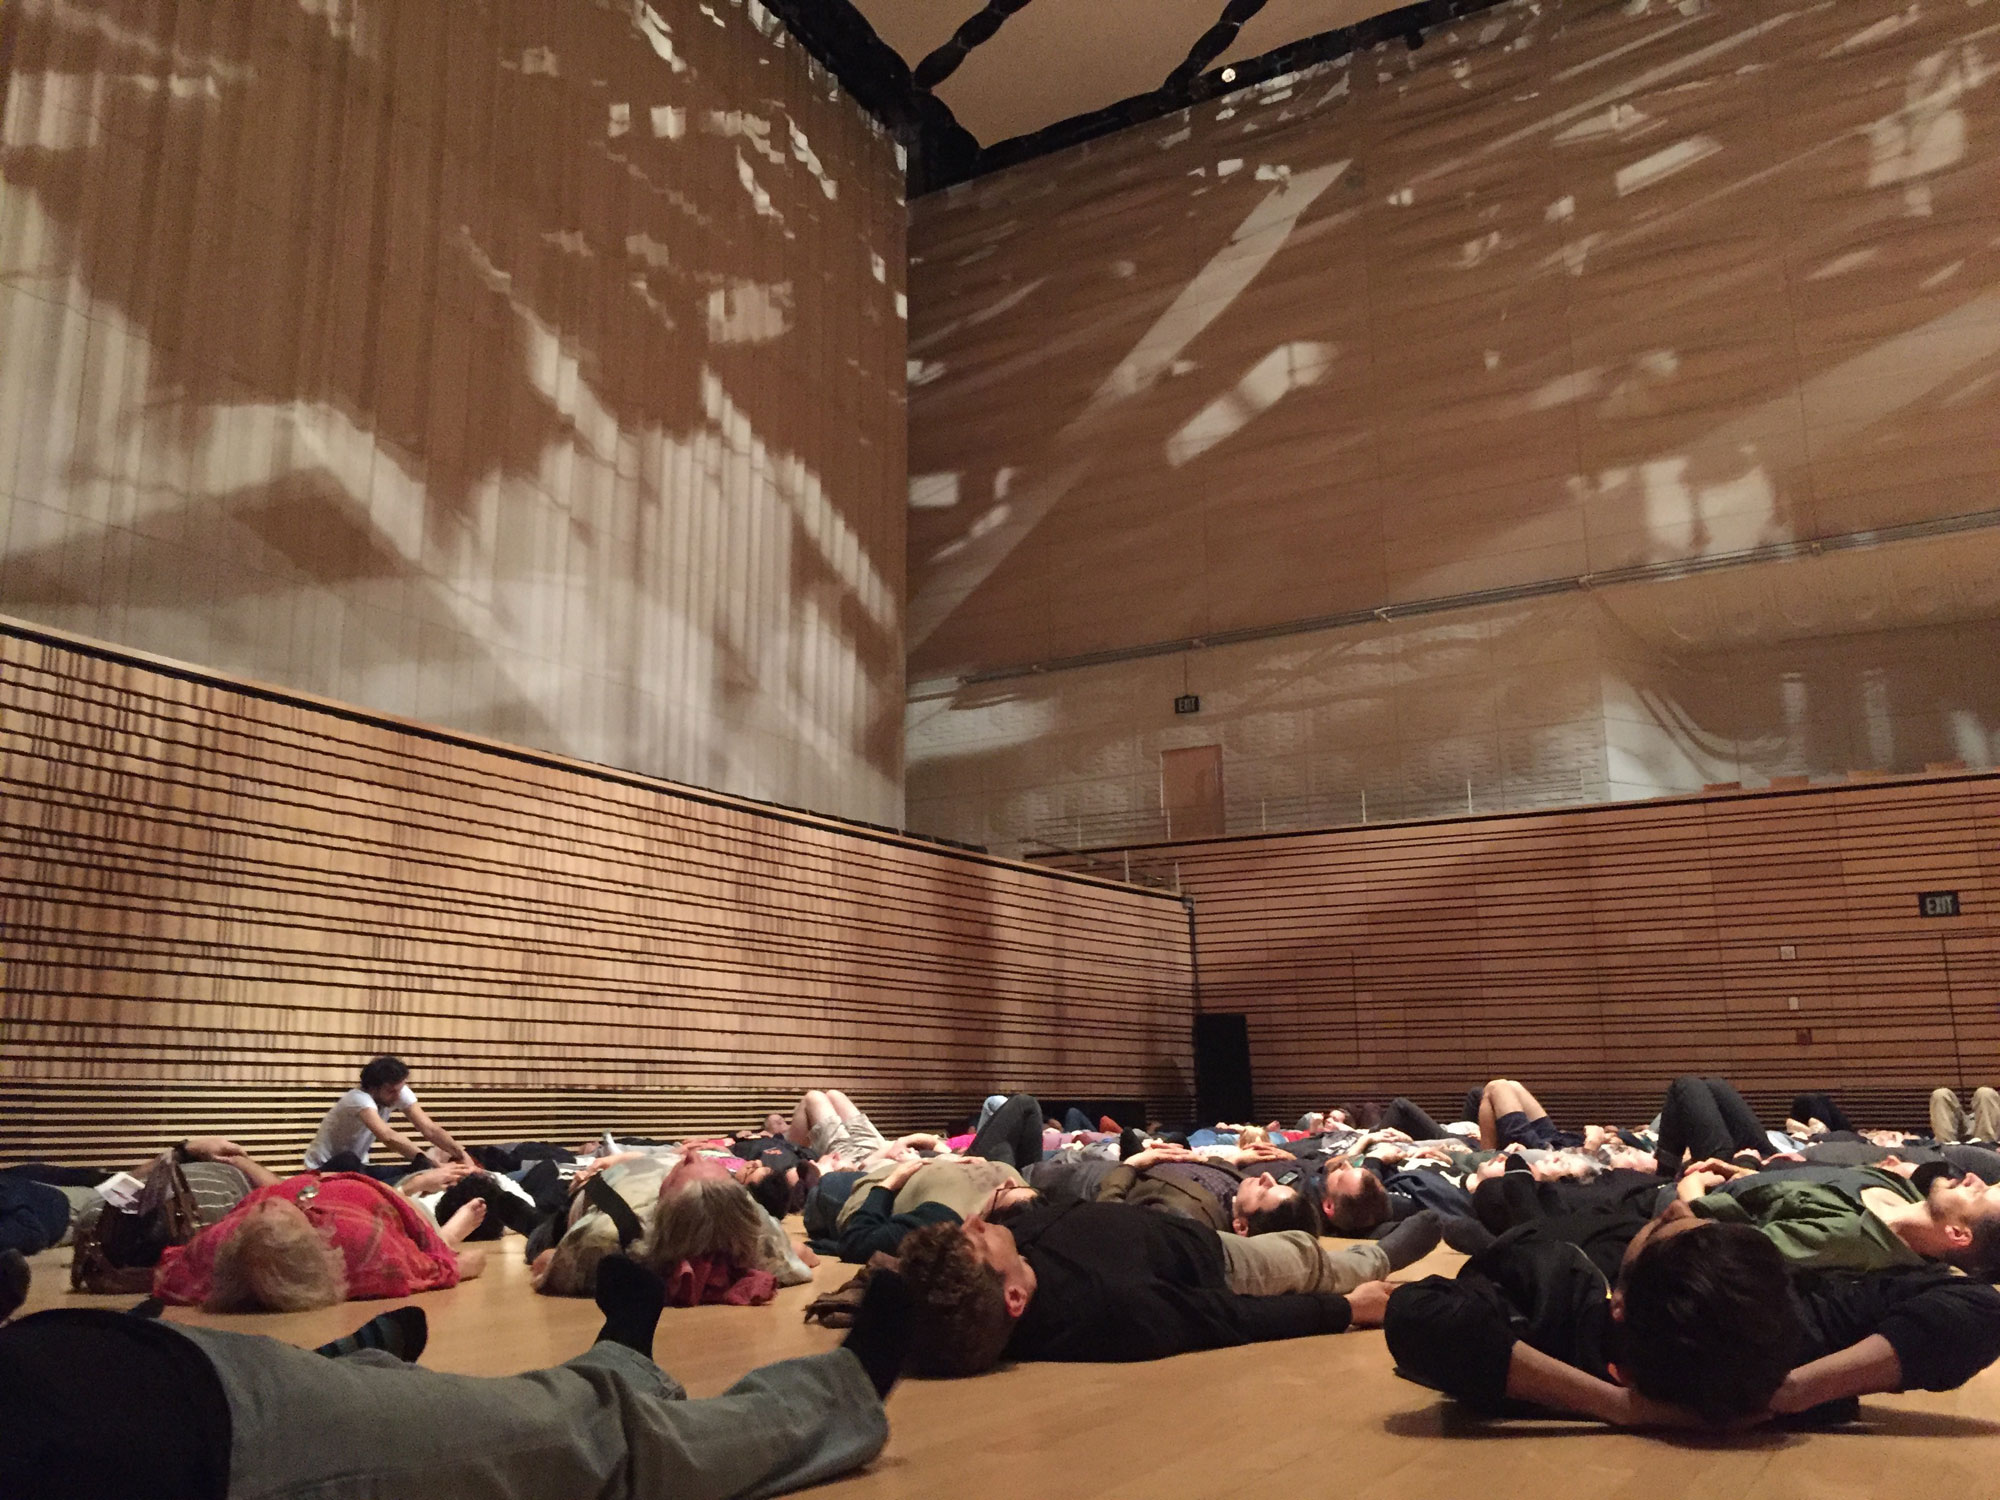  A crowd of people laying on their backs across the Concert Hall stage.